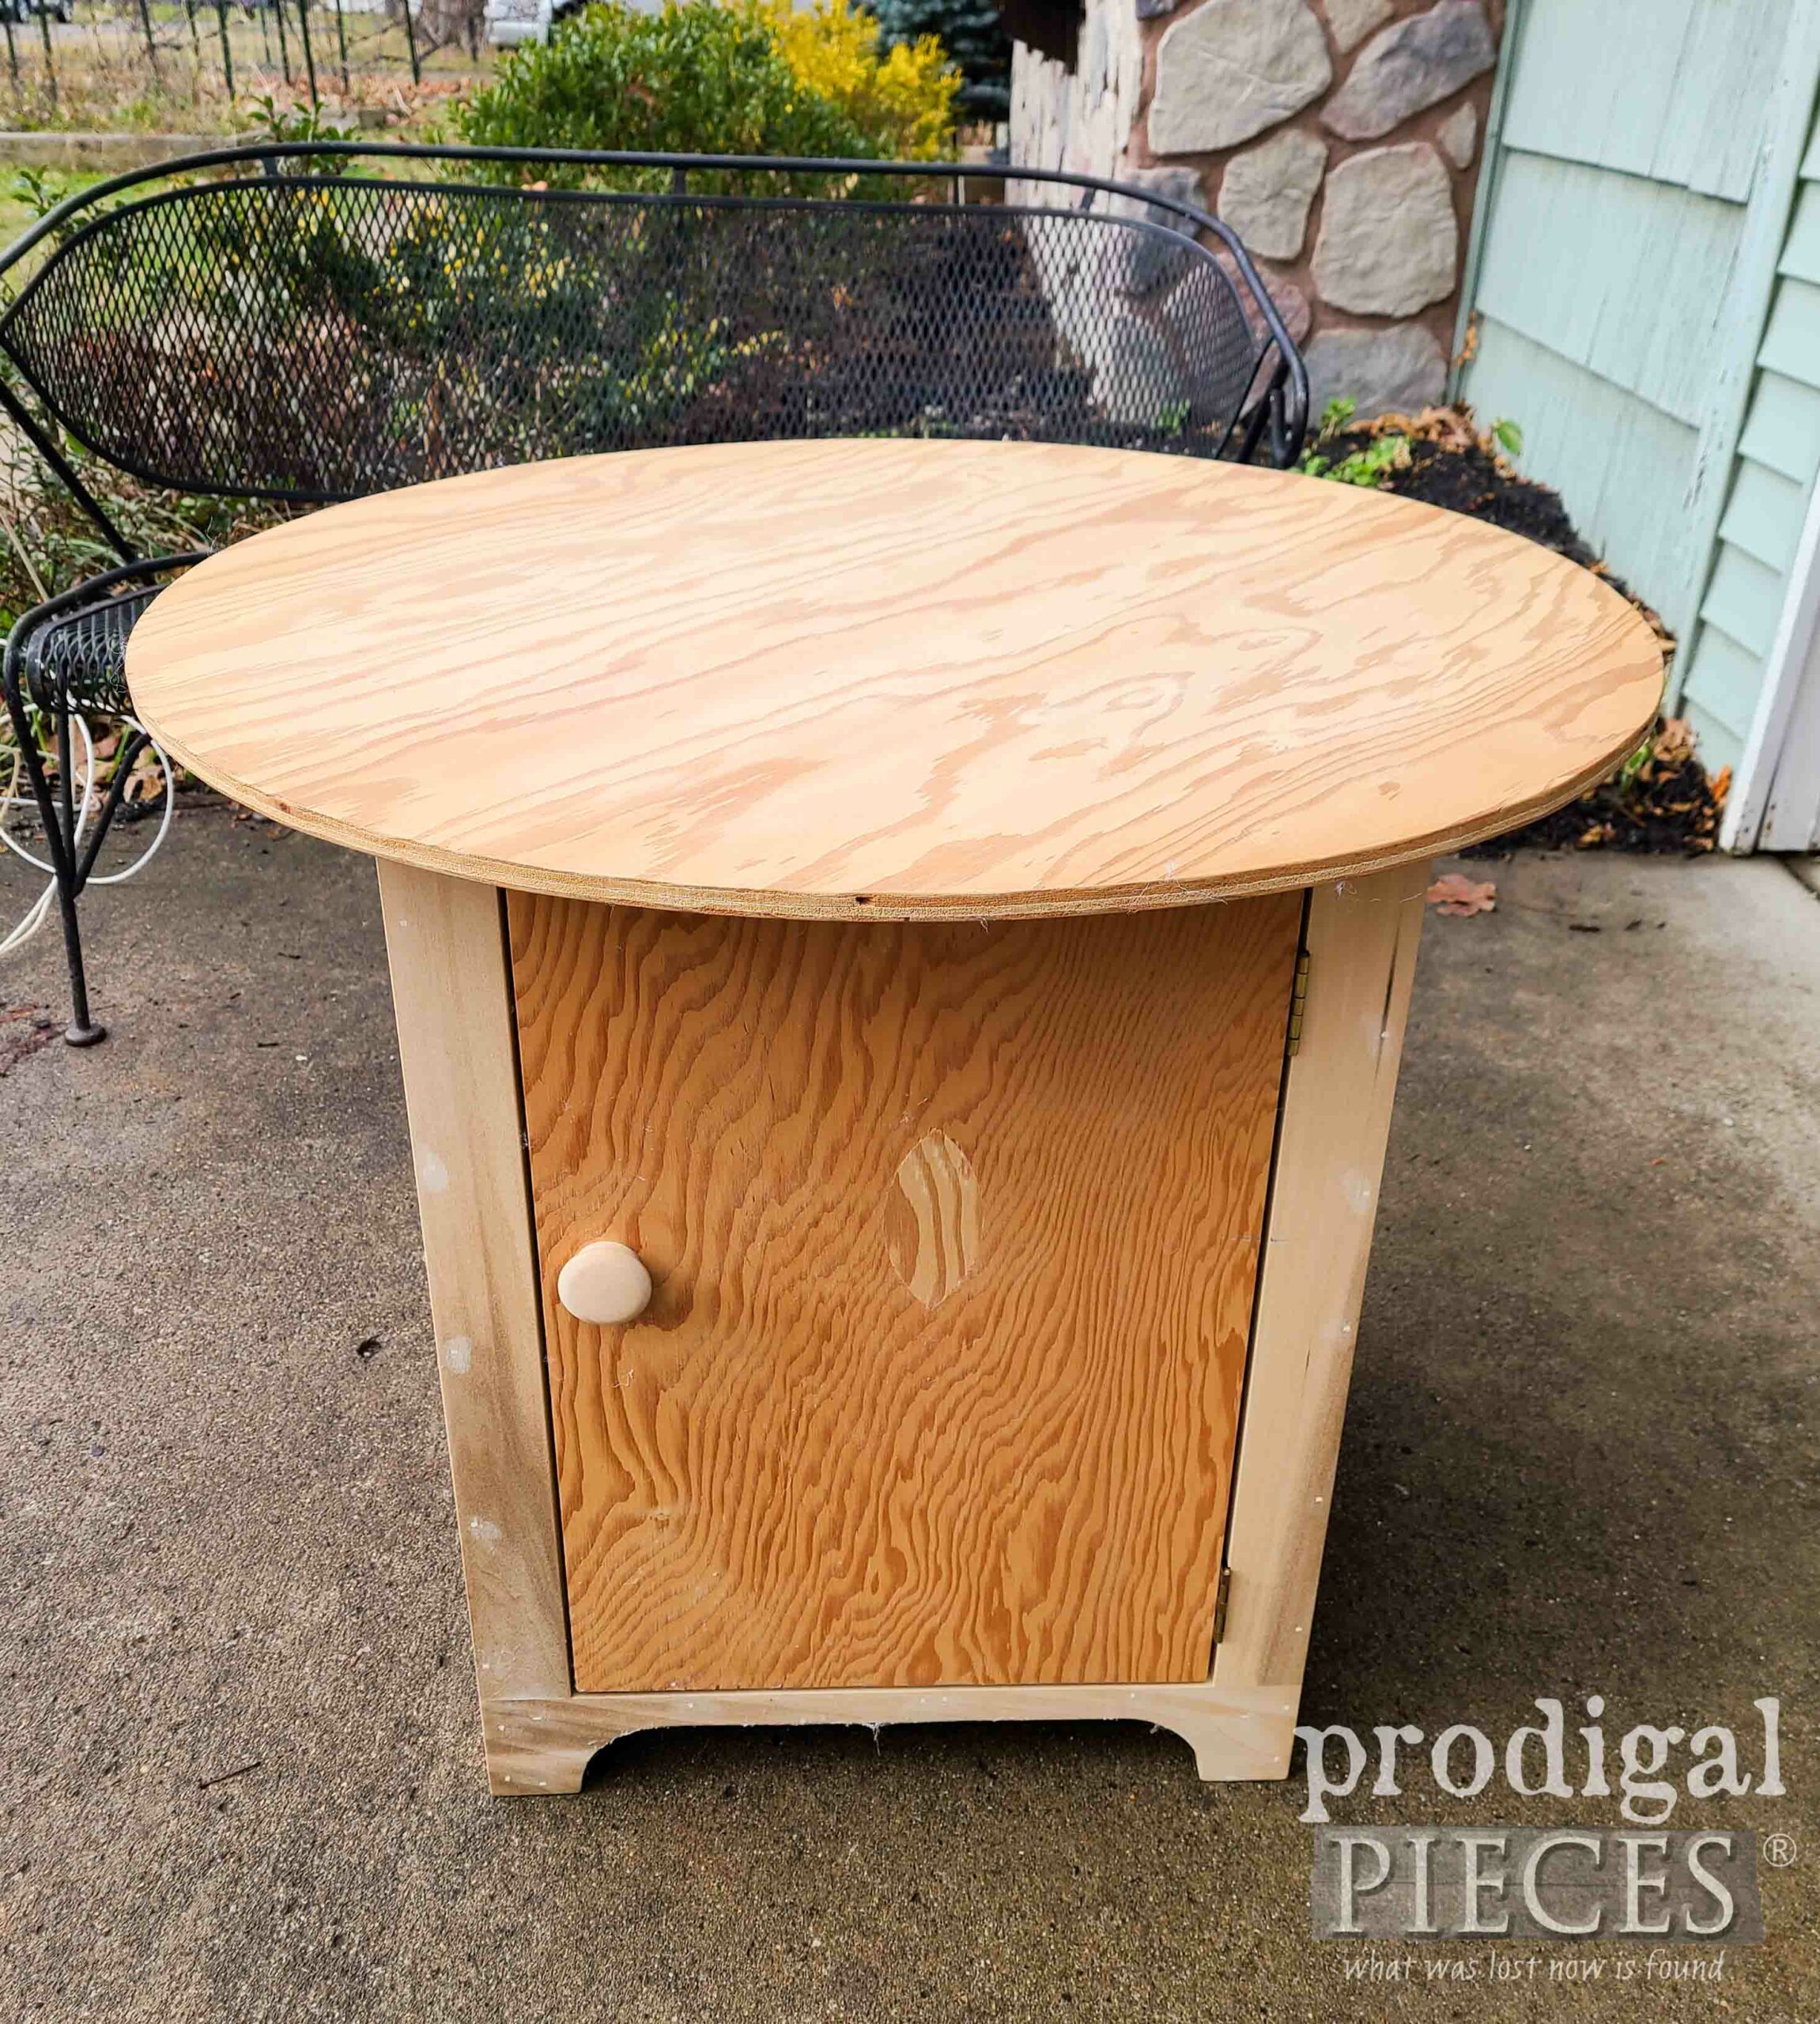 Plywood Table Before | prodigalpieces.com #prodigalpieces